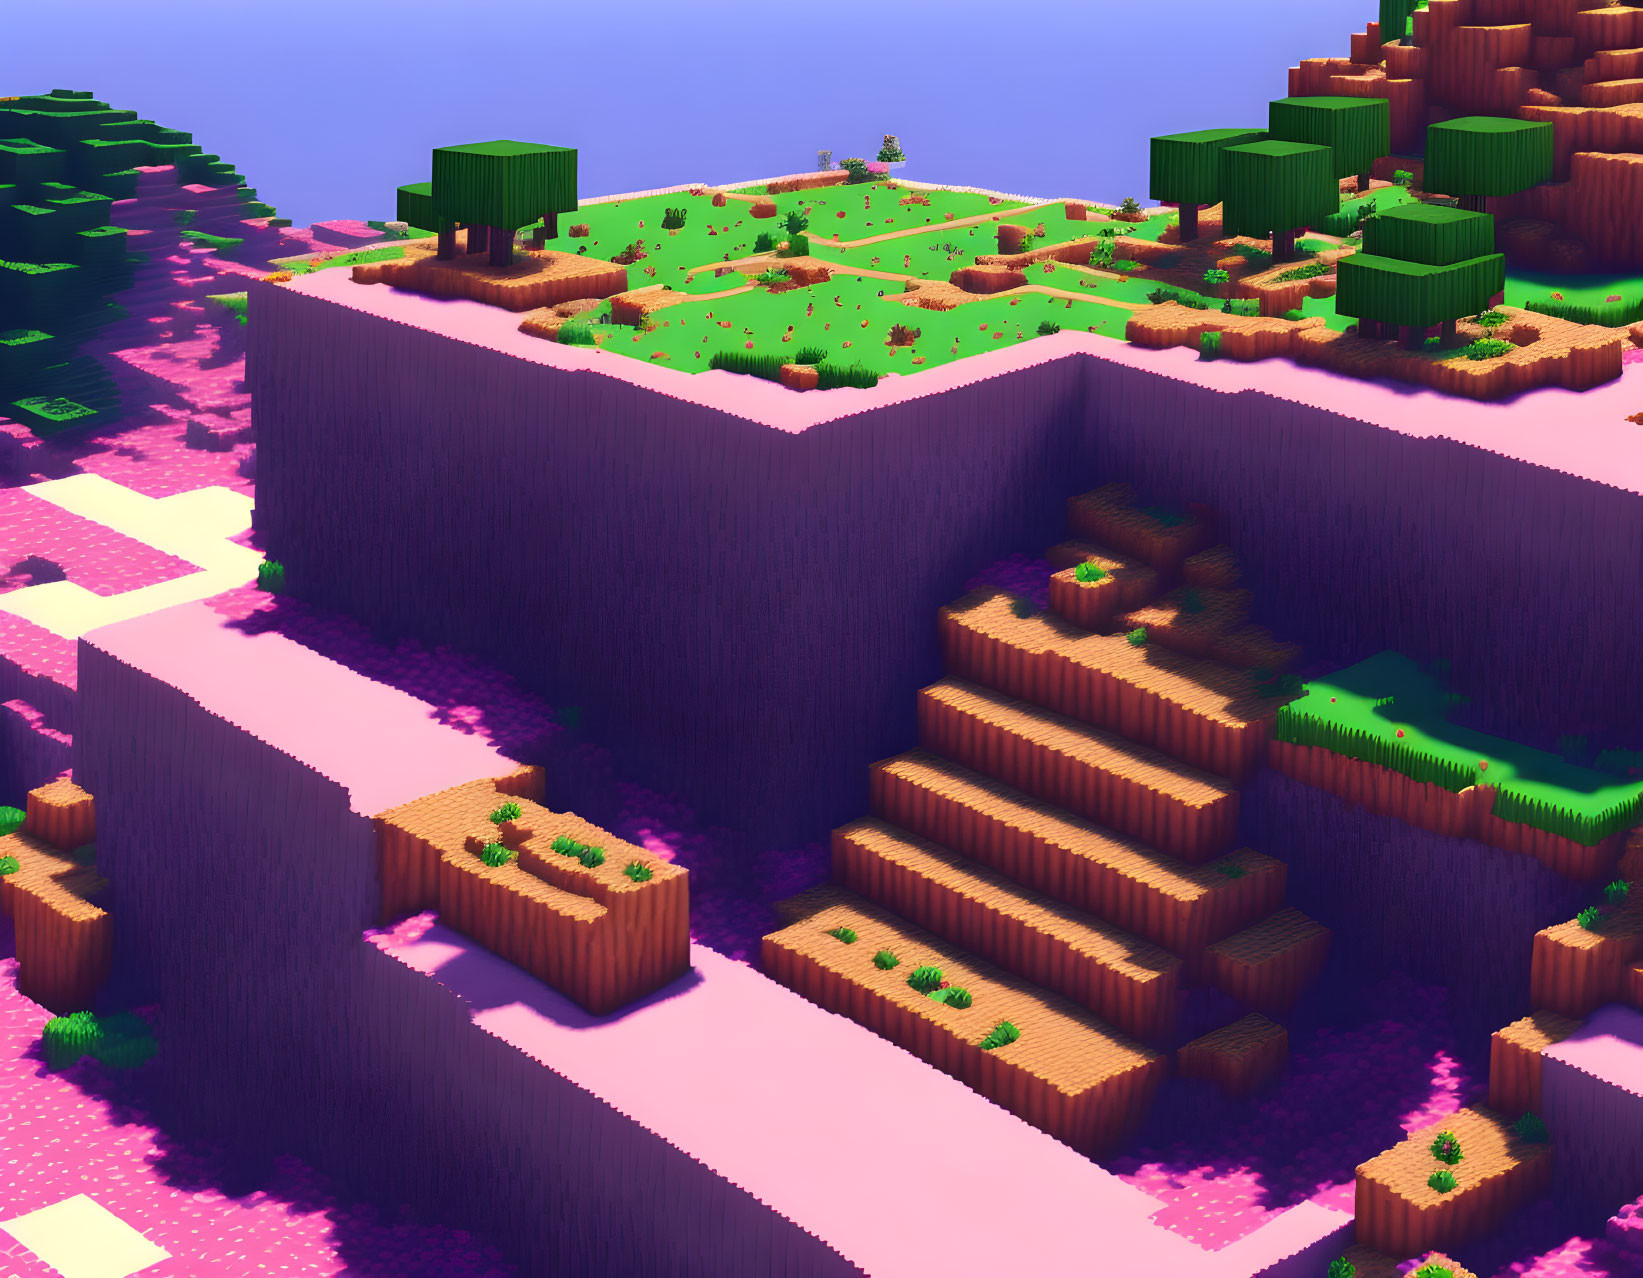 Detailed Voxel Landscape with Pink Underground and Green Surface